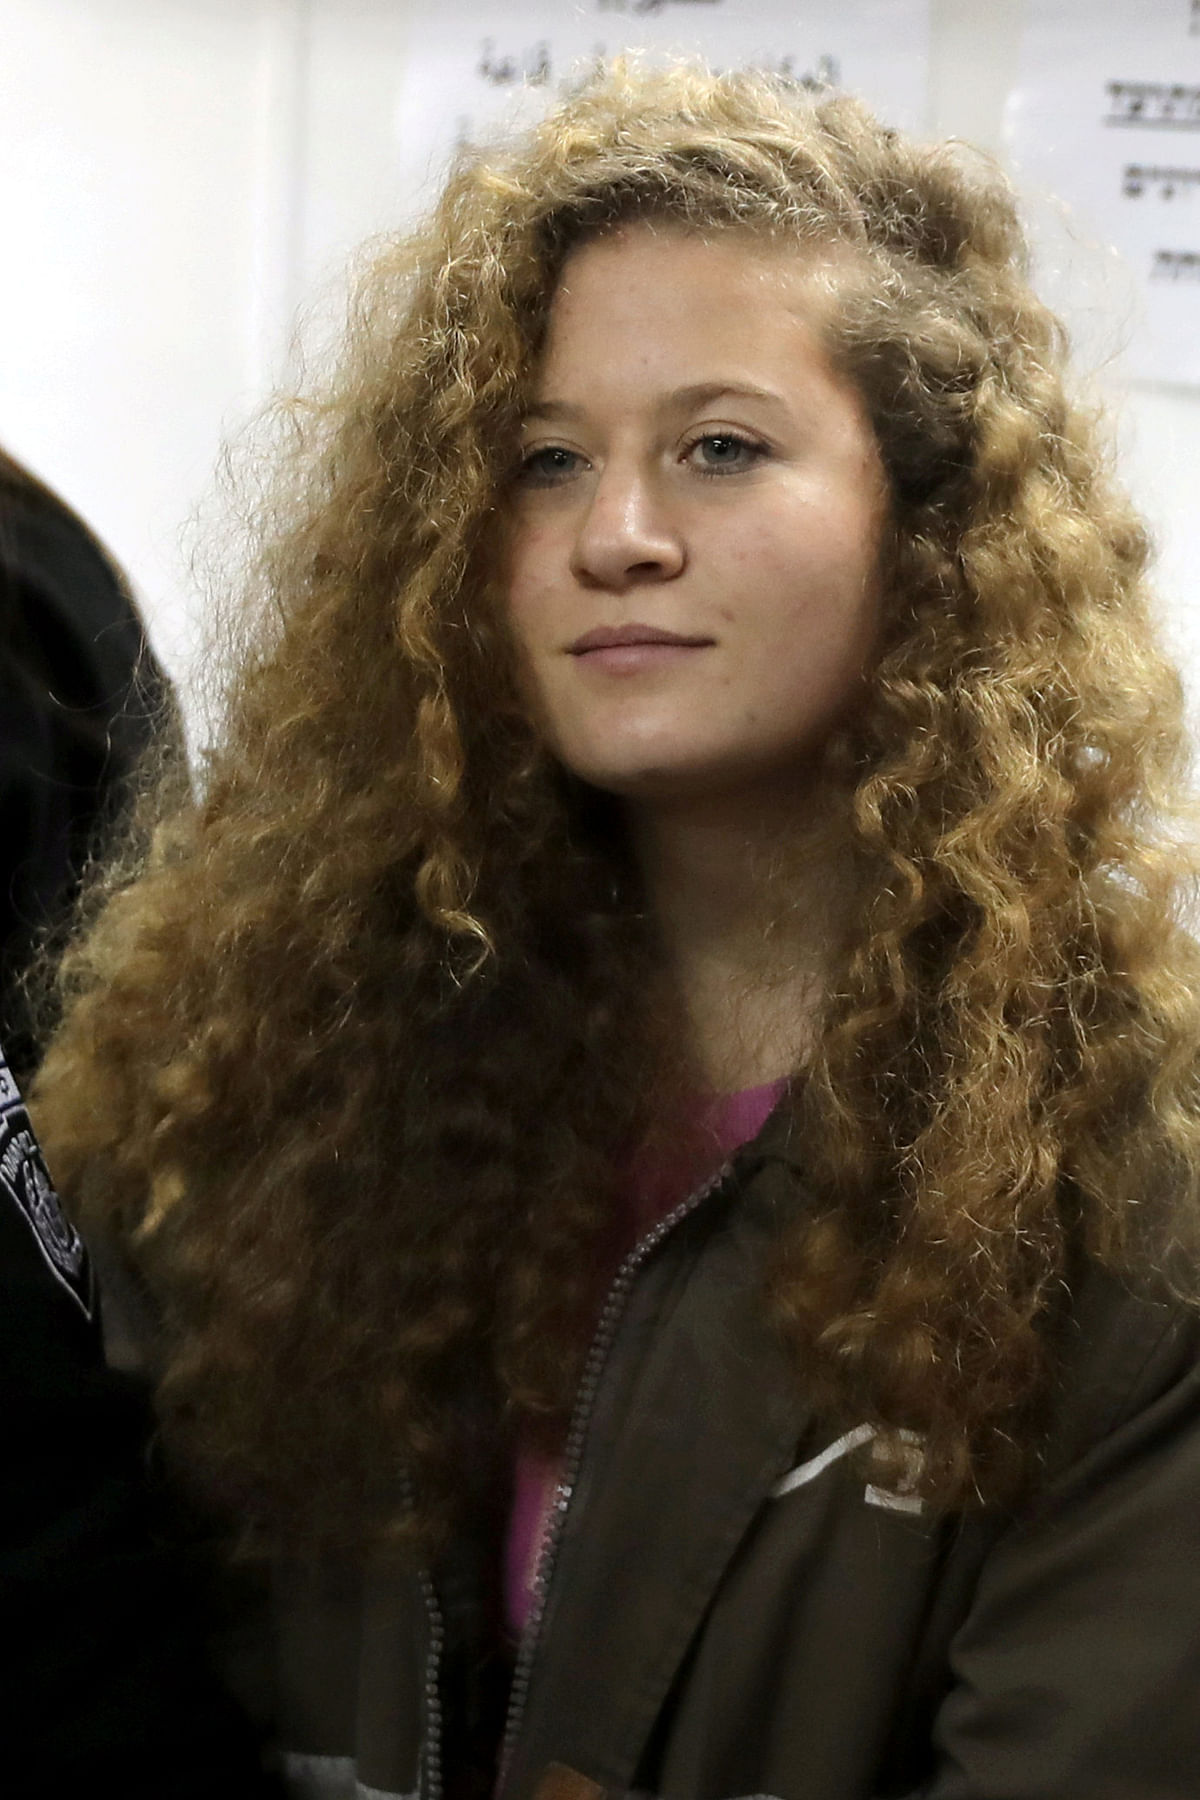 Palestinian teen Ahed Tamimi enters a military courtroom at Ofer Prison, near the West Bank city of Ramallah, 23 February. Photo: Reuters